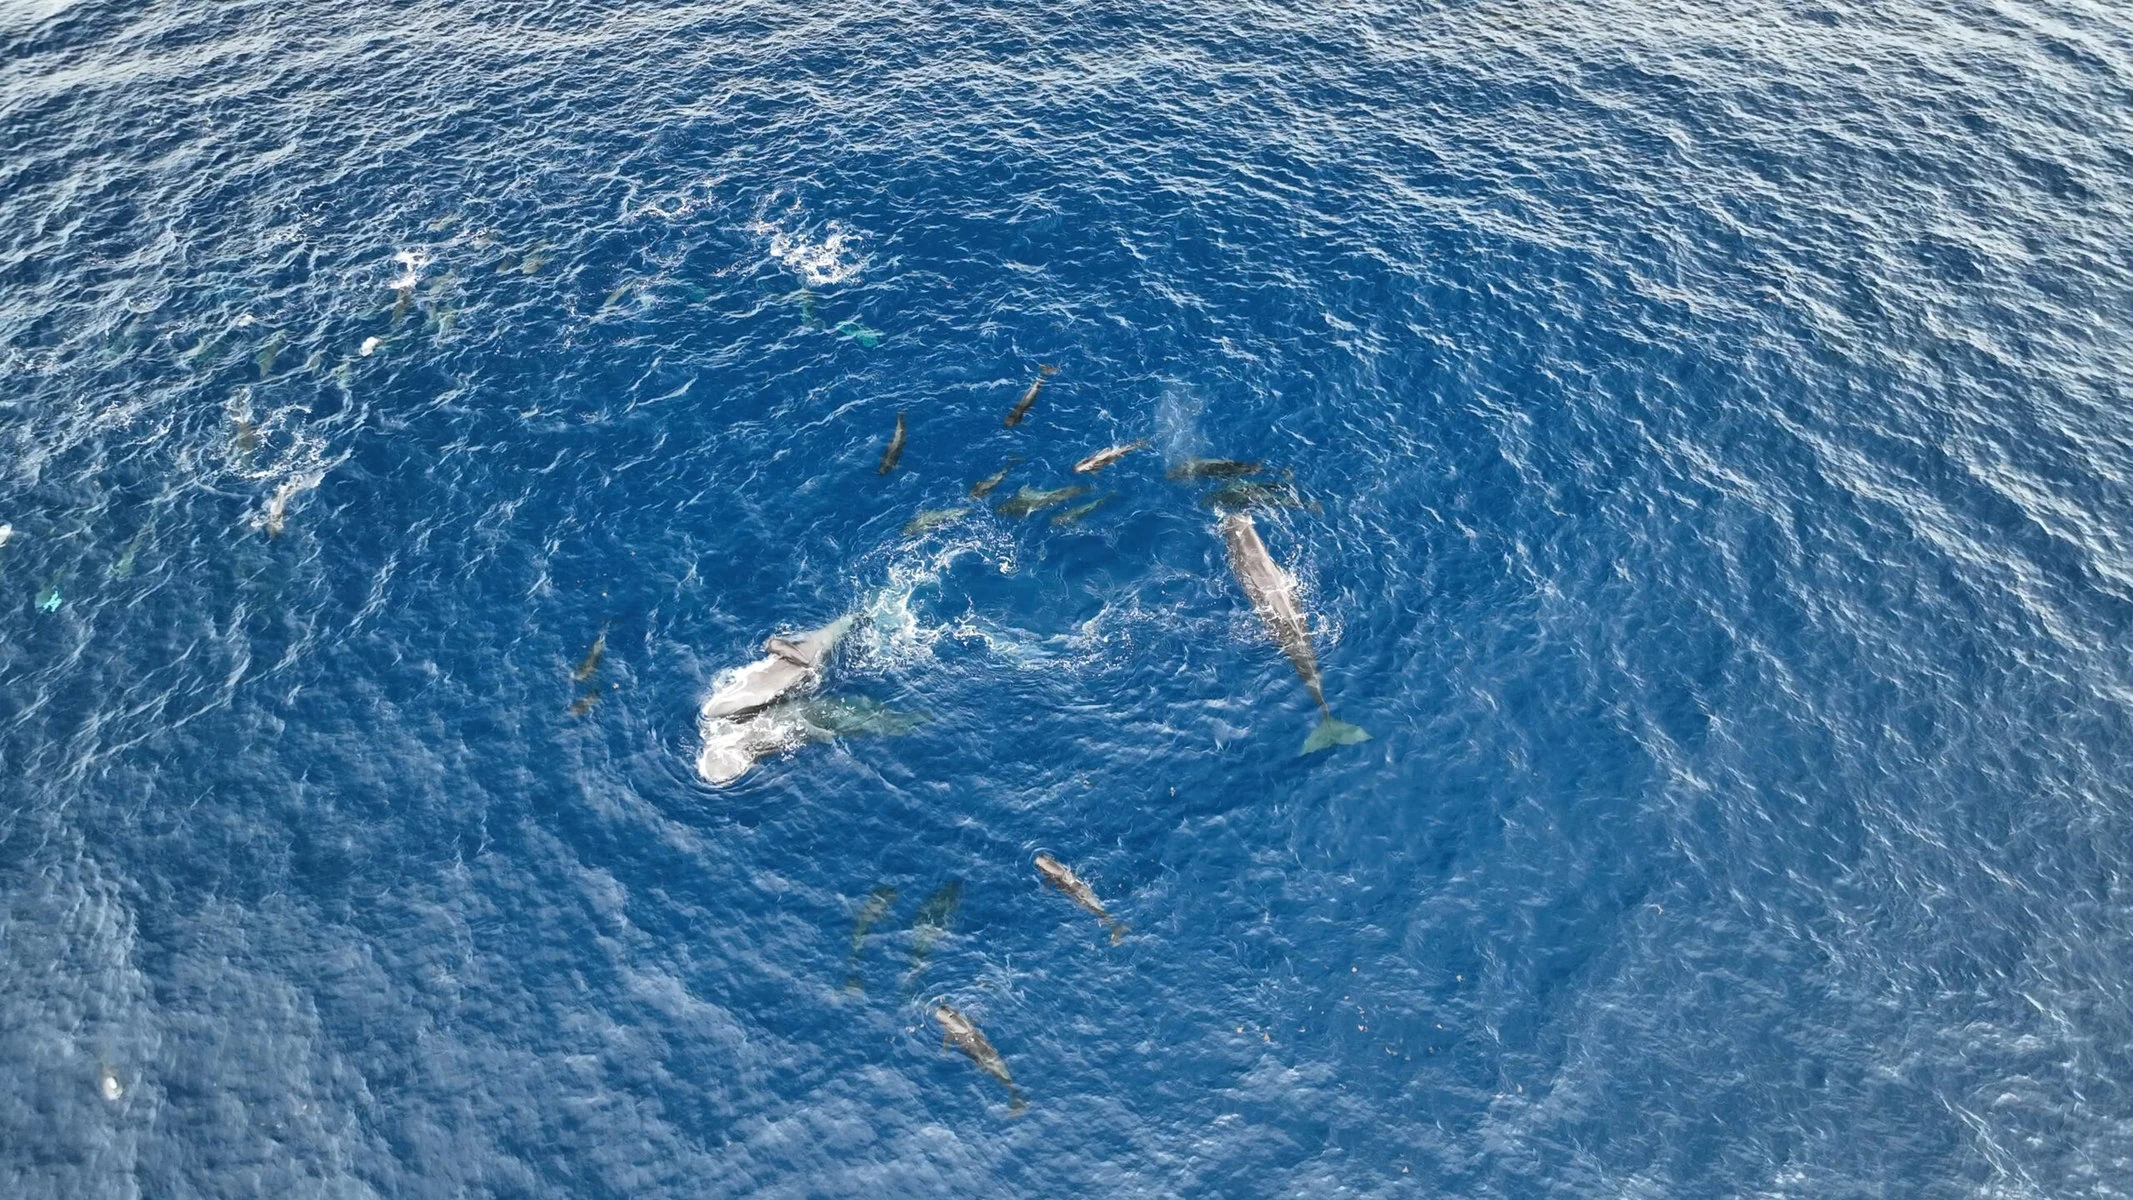 Sperm whale birth seen from above in the Eastern Caribbean.